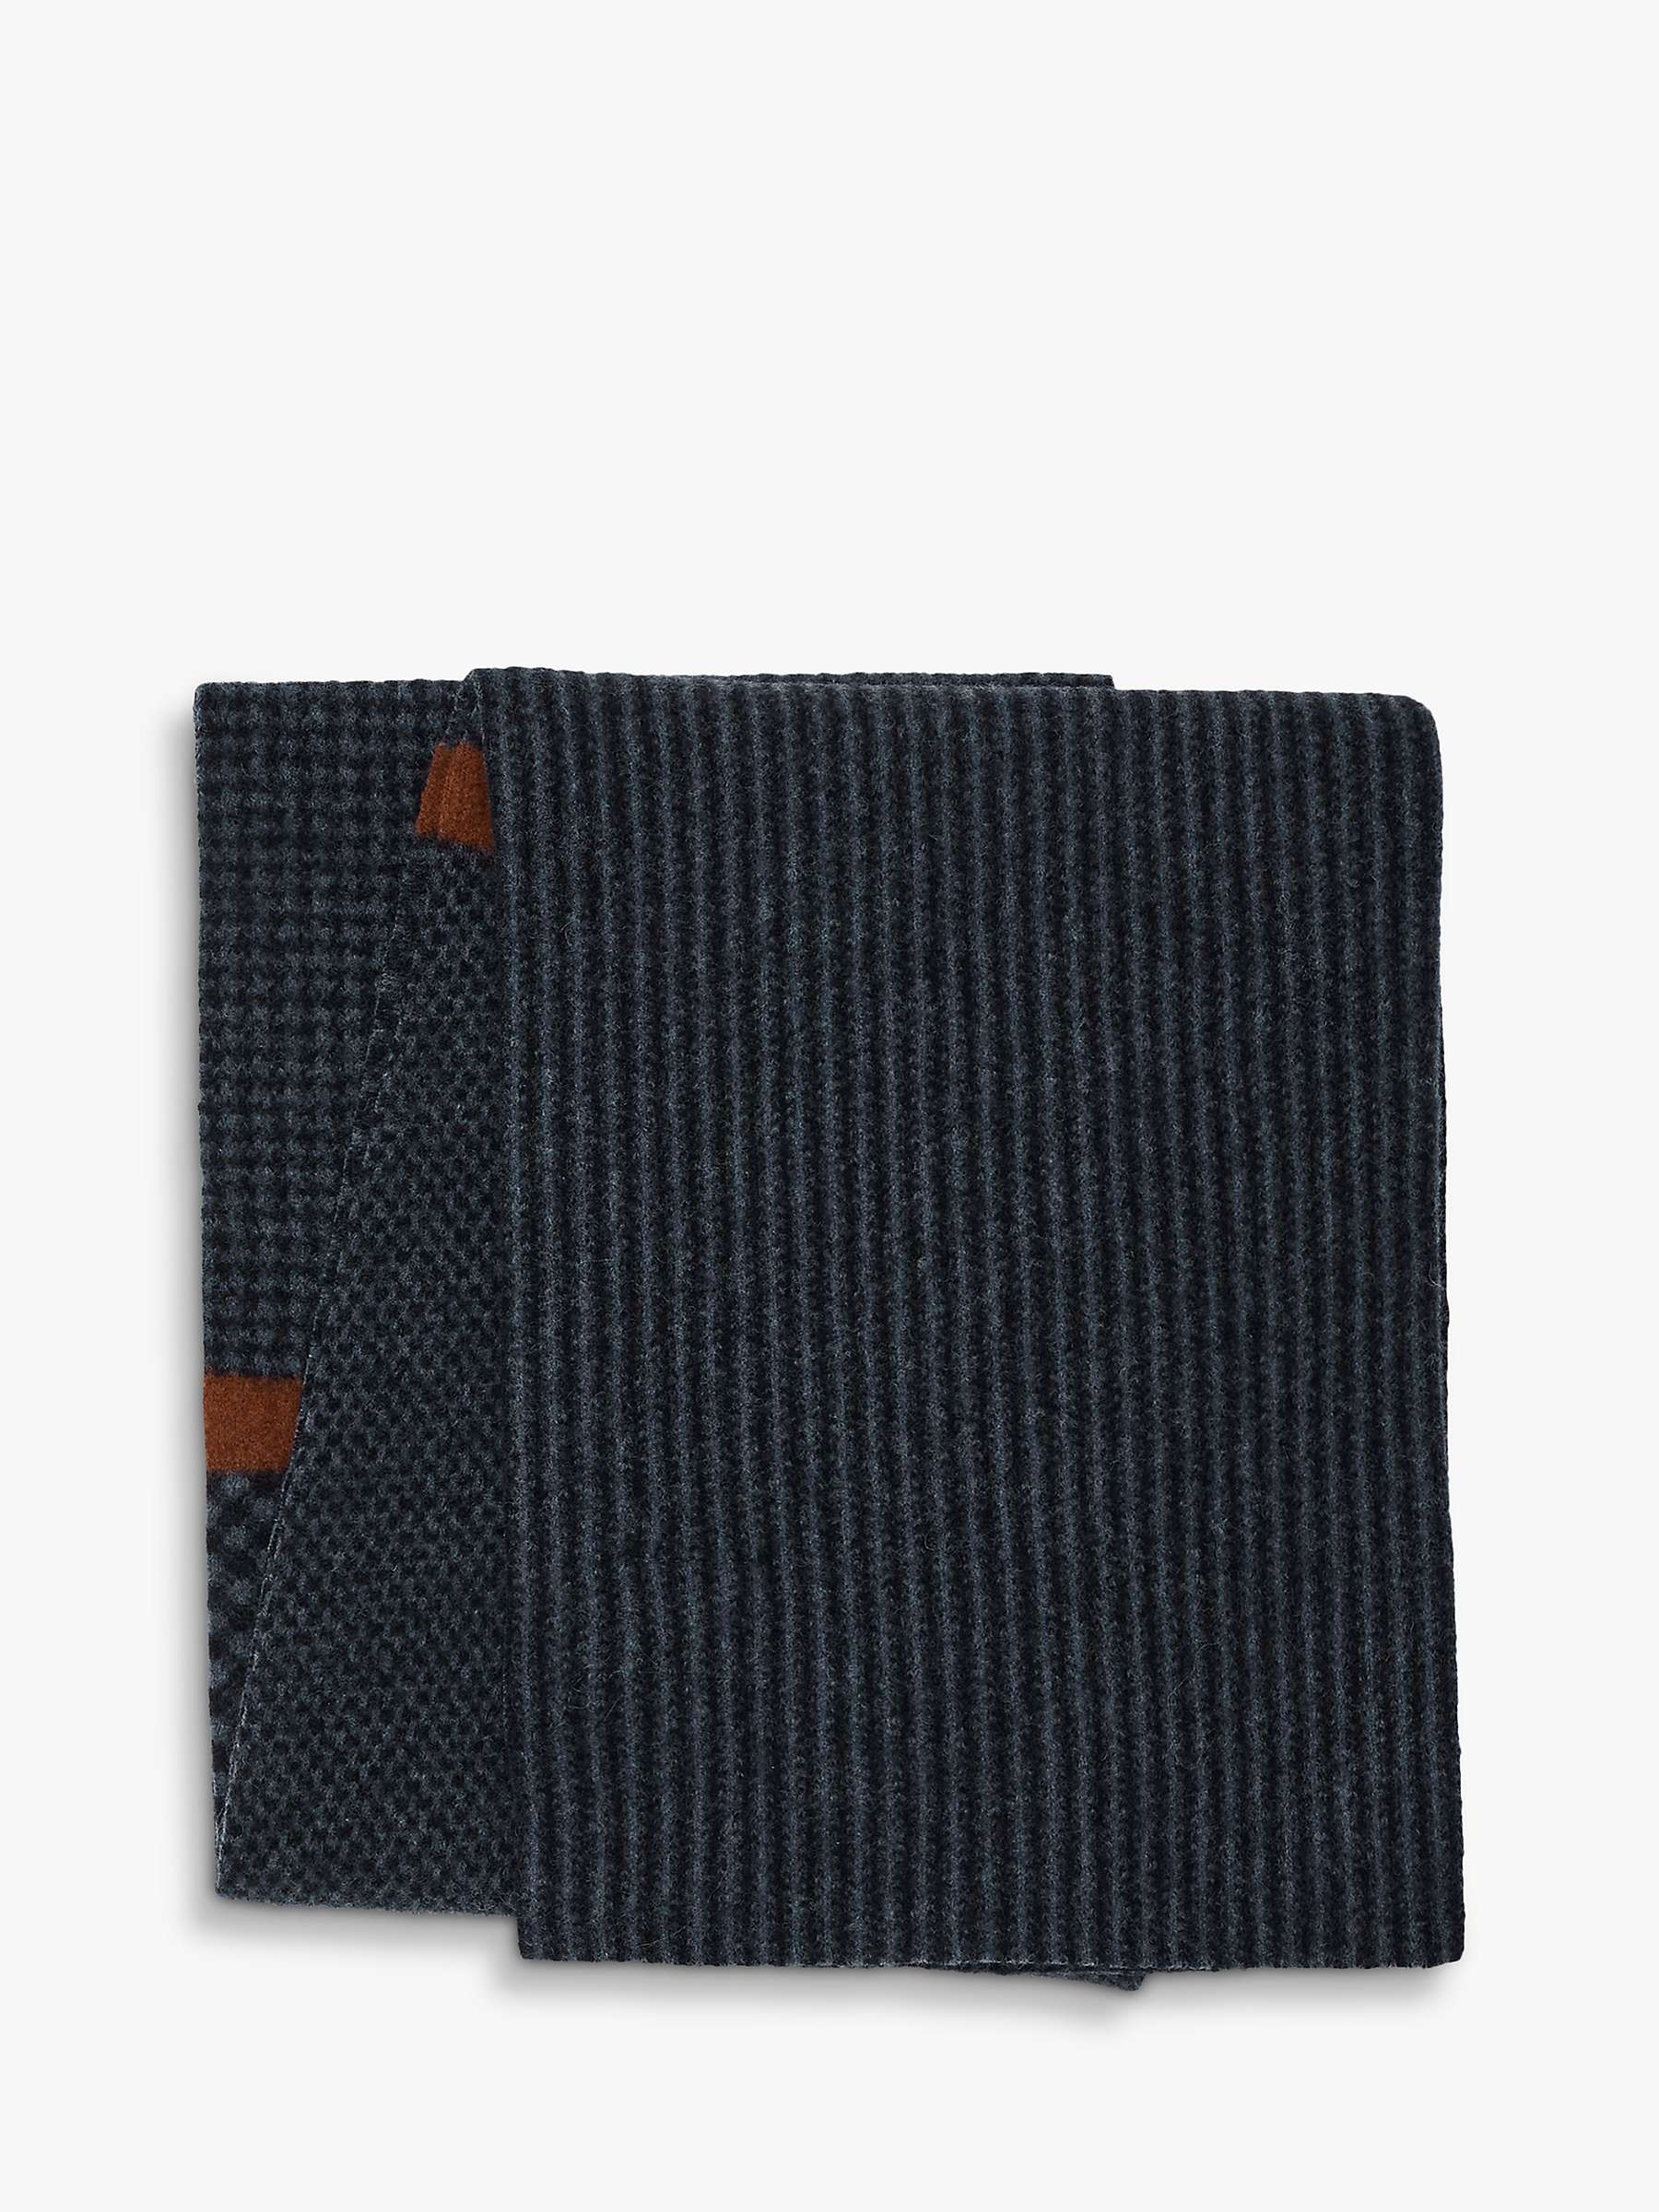 Buy Celtic & Co. Lambswool Chevron Scarf Online at johnlewis.com